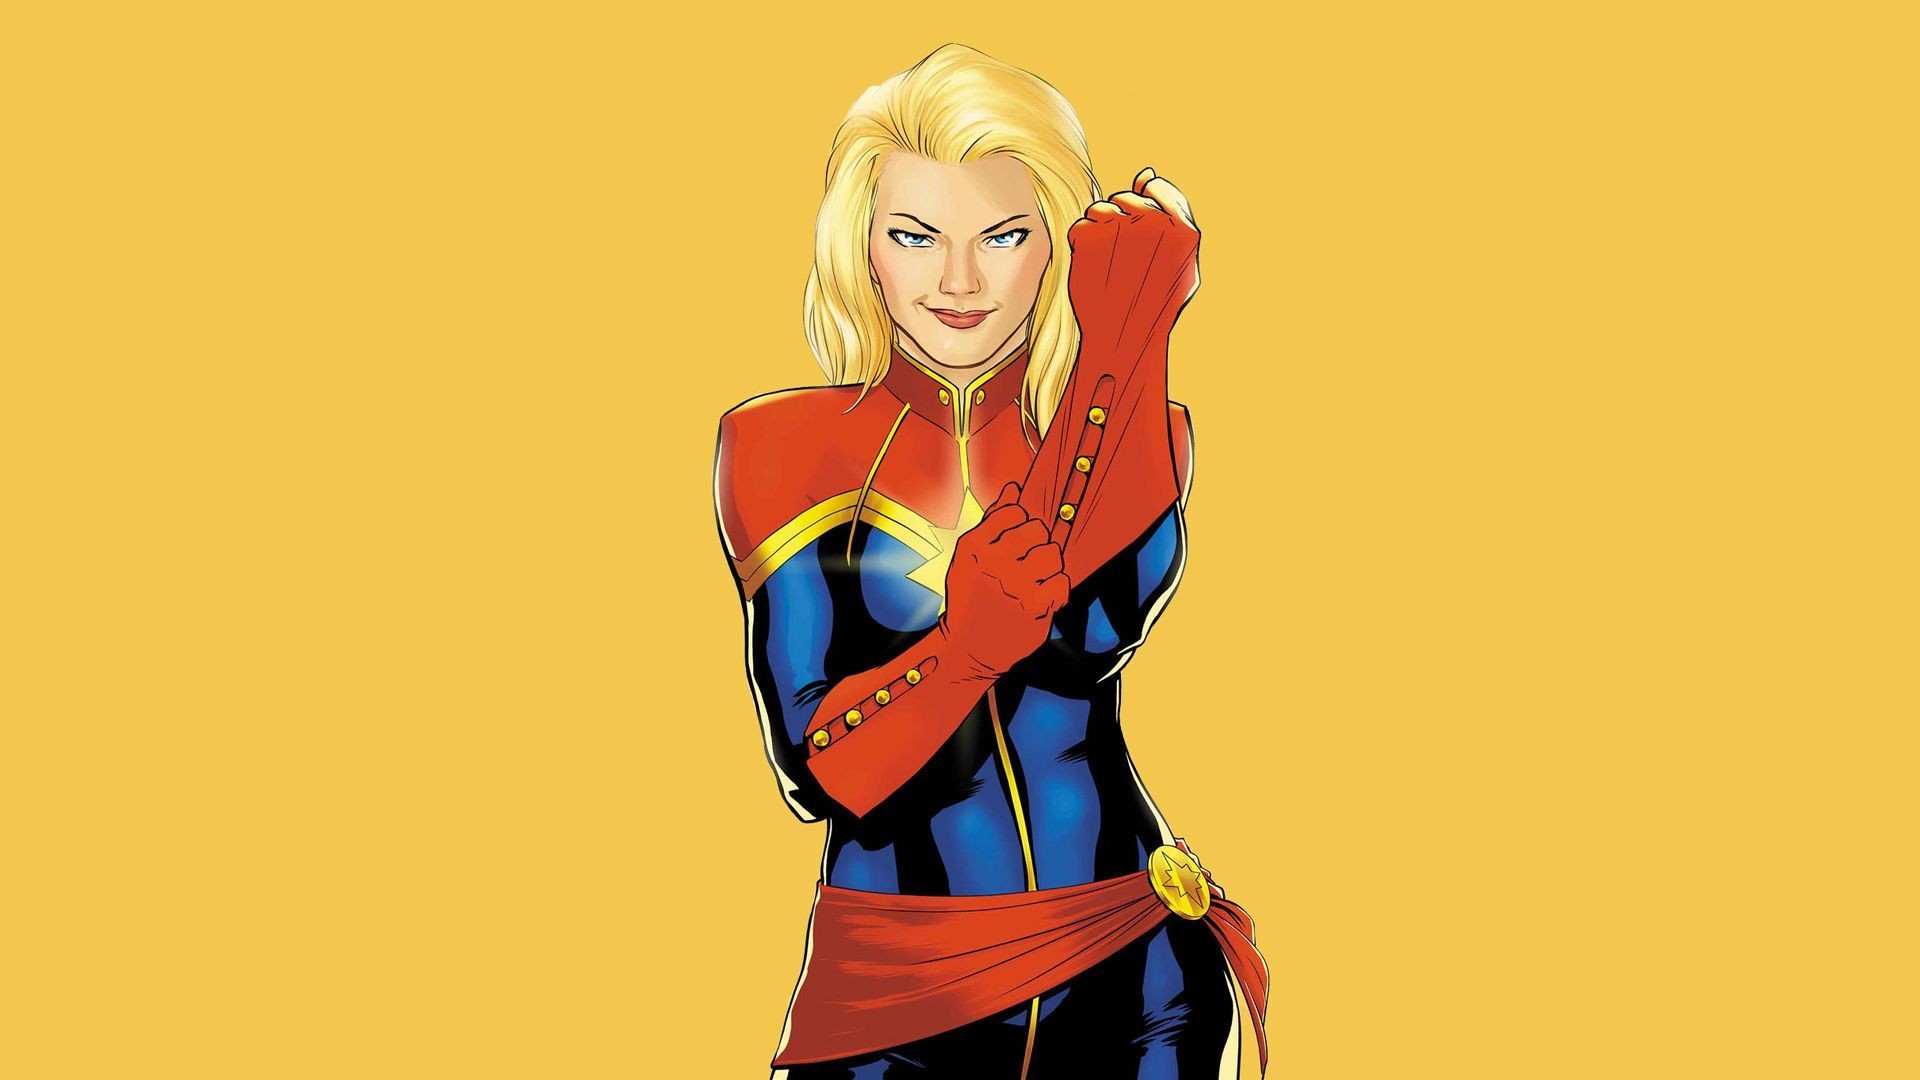 Wallpaper Captain Marvel Animated HD with high-resolution 1920x1080 pixel. You can use this wallpaper for your Desktop Computer Backgrounds, Mac Wallpapers, Android Lock screen or iPhone Screensavers and another smartphone device